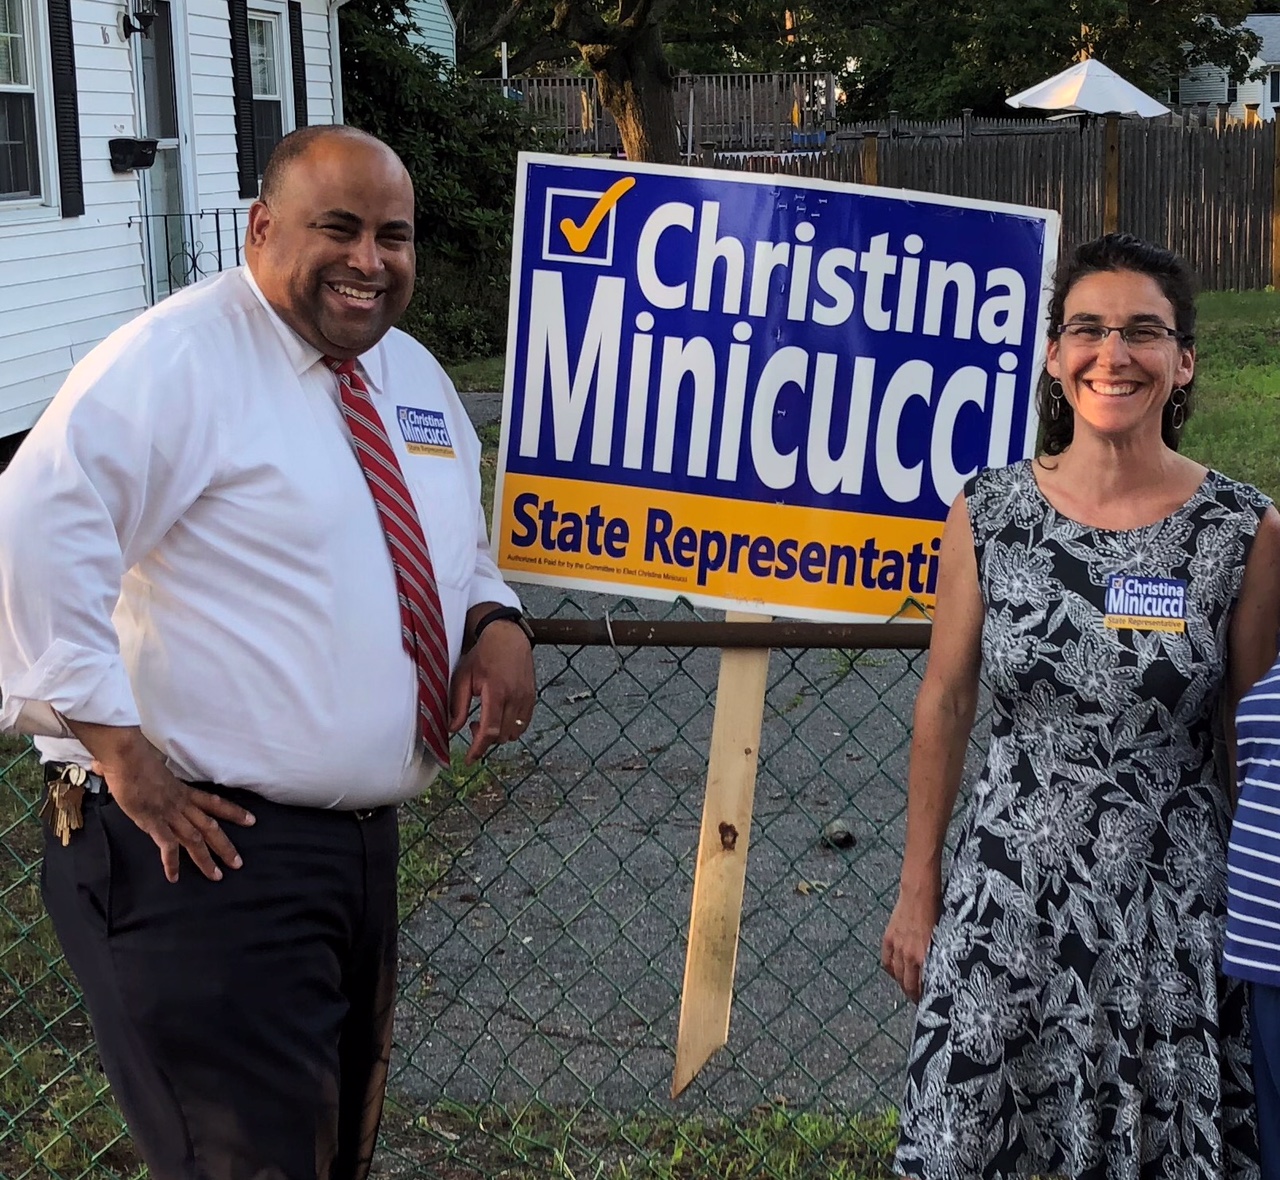 Lawrence Mayor Endorses Minicucci For State Rep. to Replace DiZoglio